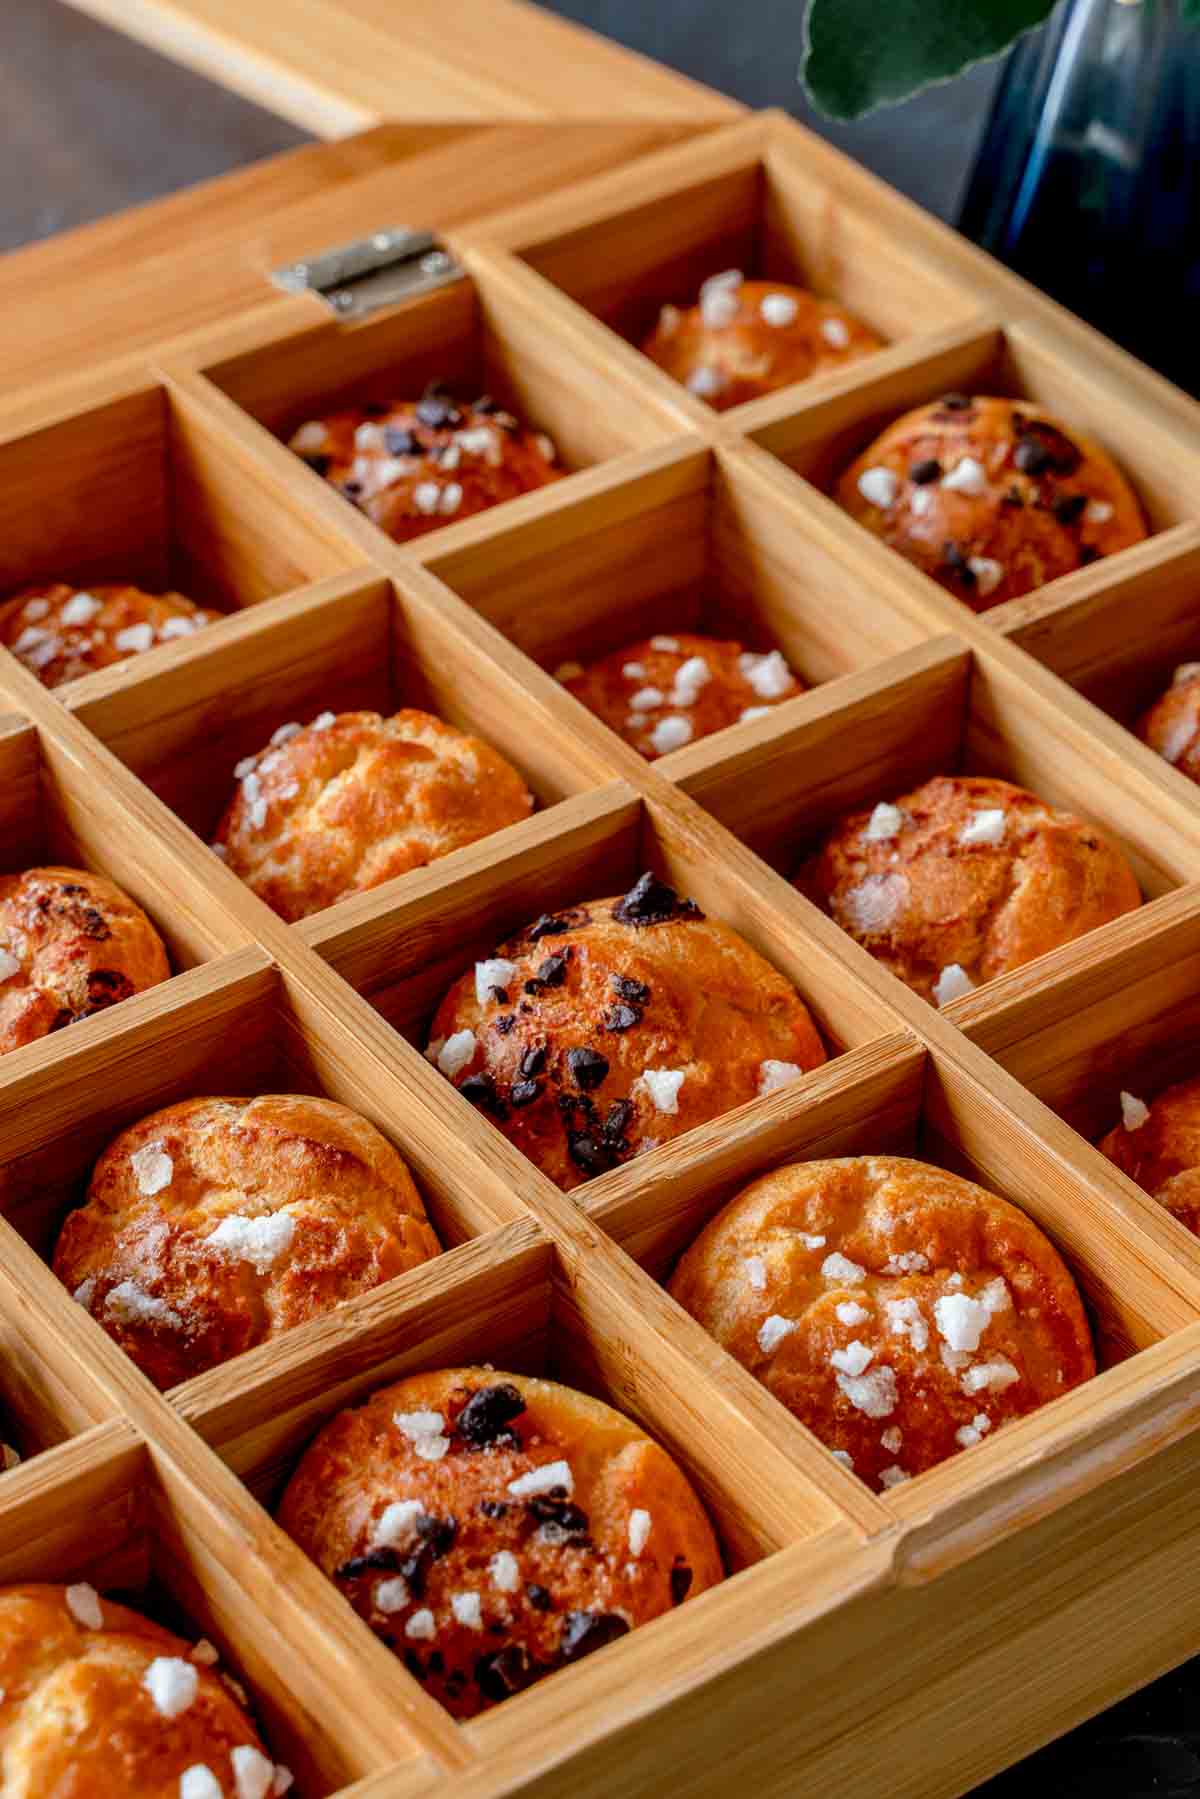 Chouquettes in a wooden box. Some have pearl sugar only, and others also have chocolate on them.